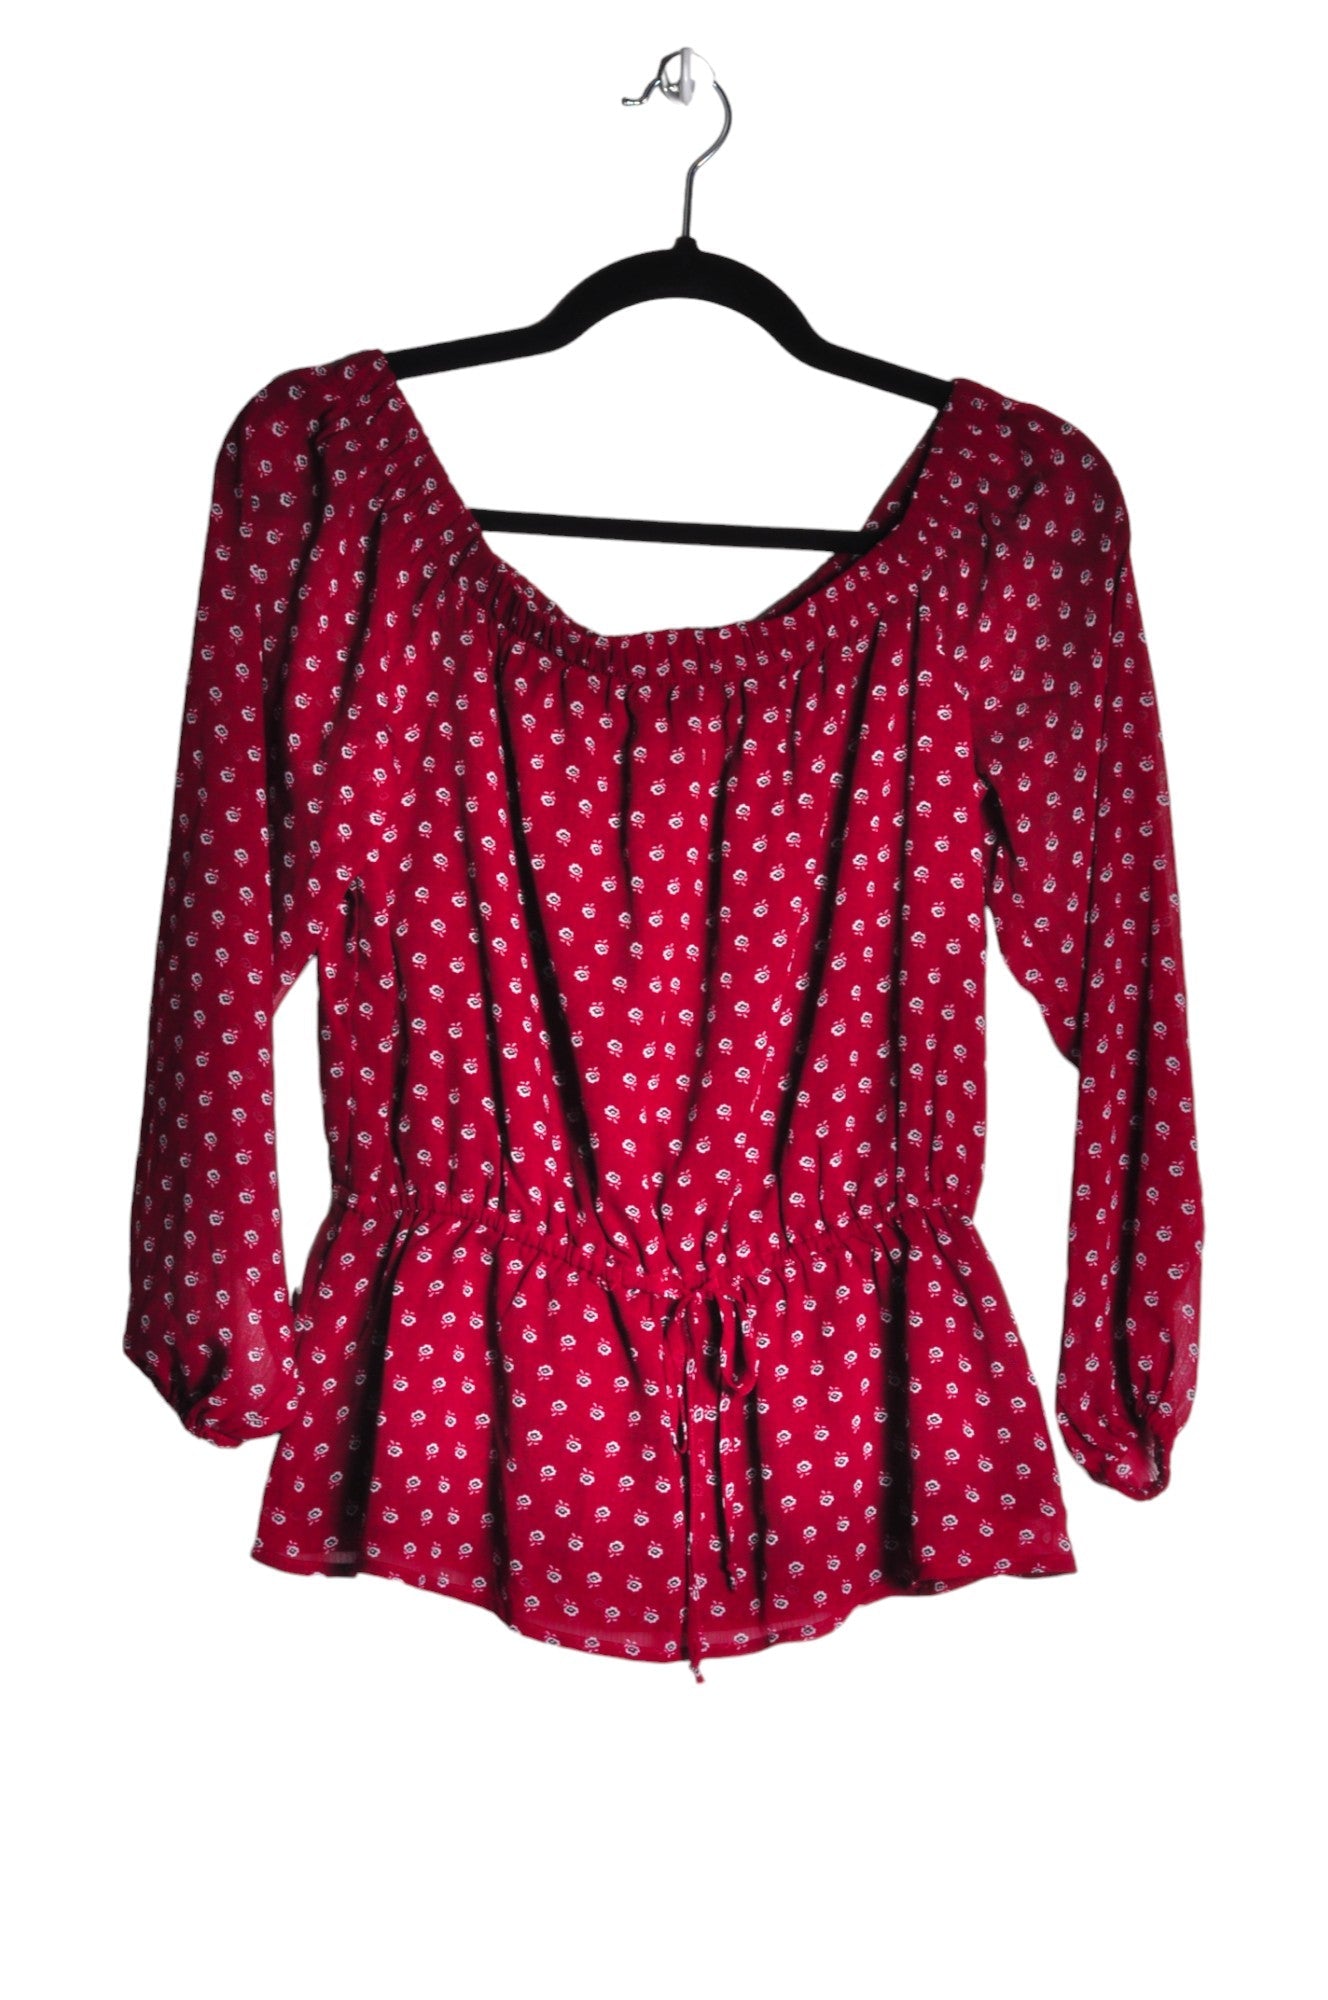 ABERCROMBIE & FITCH Women Blouses Regular fit in Red - Size XS | 23 $ KOOP